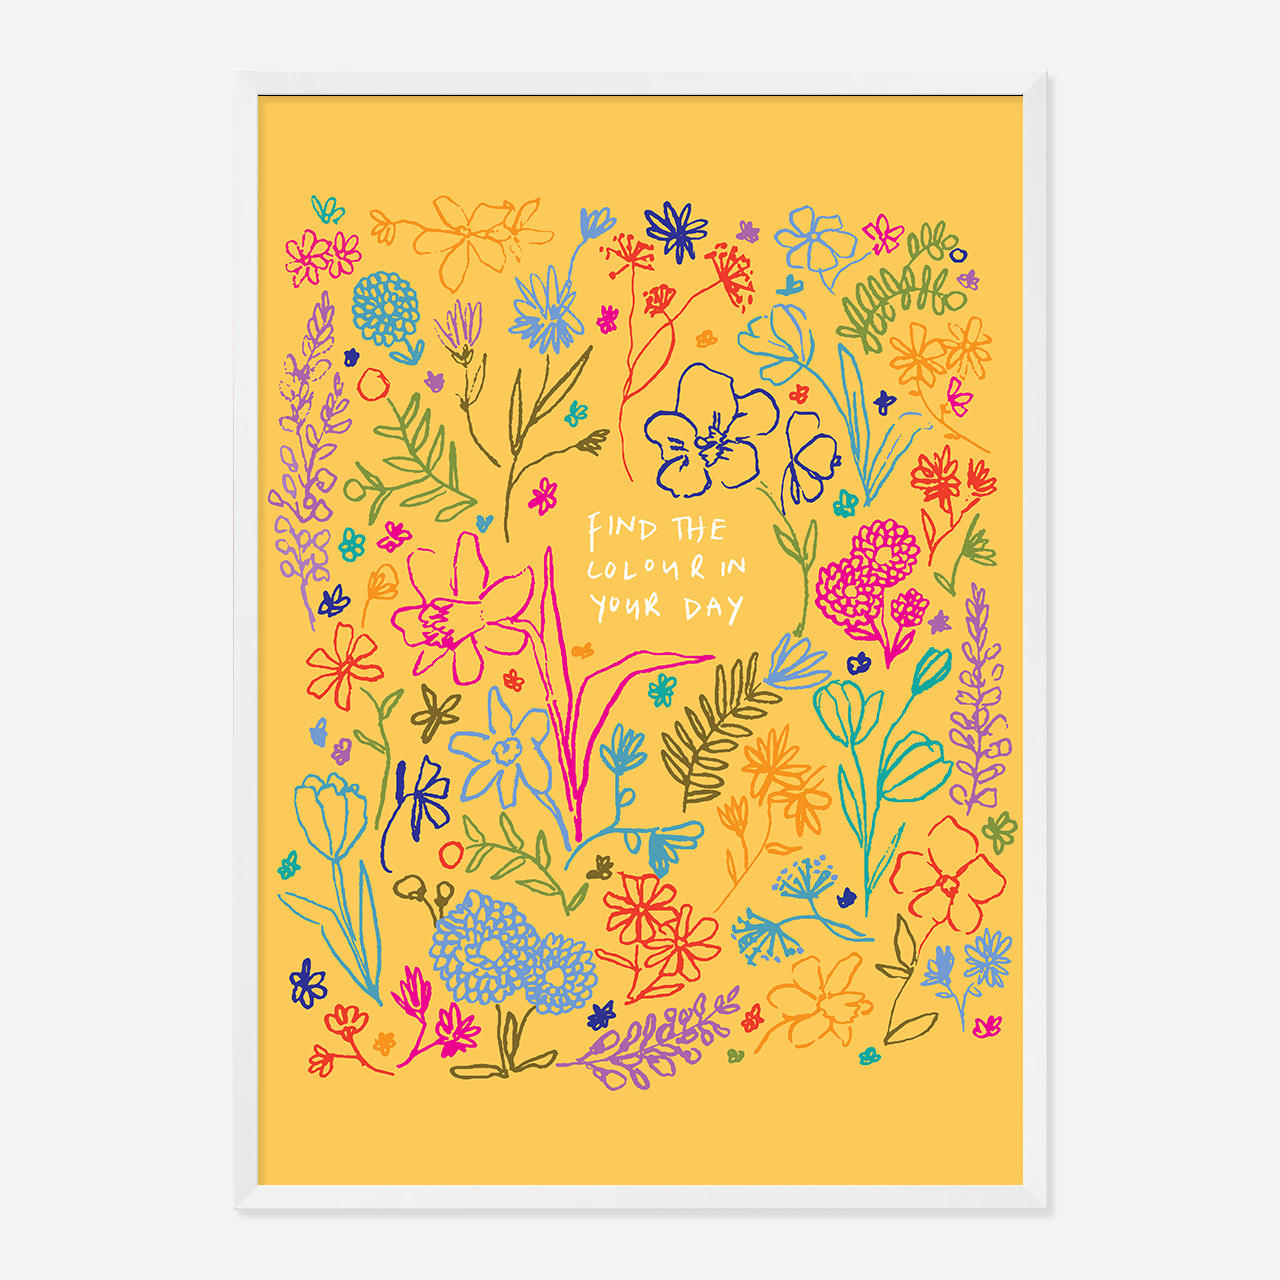 COLOUR IN YOUR DAY POSTER - YELLOW